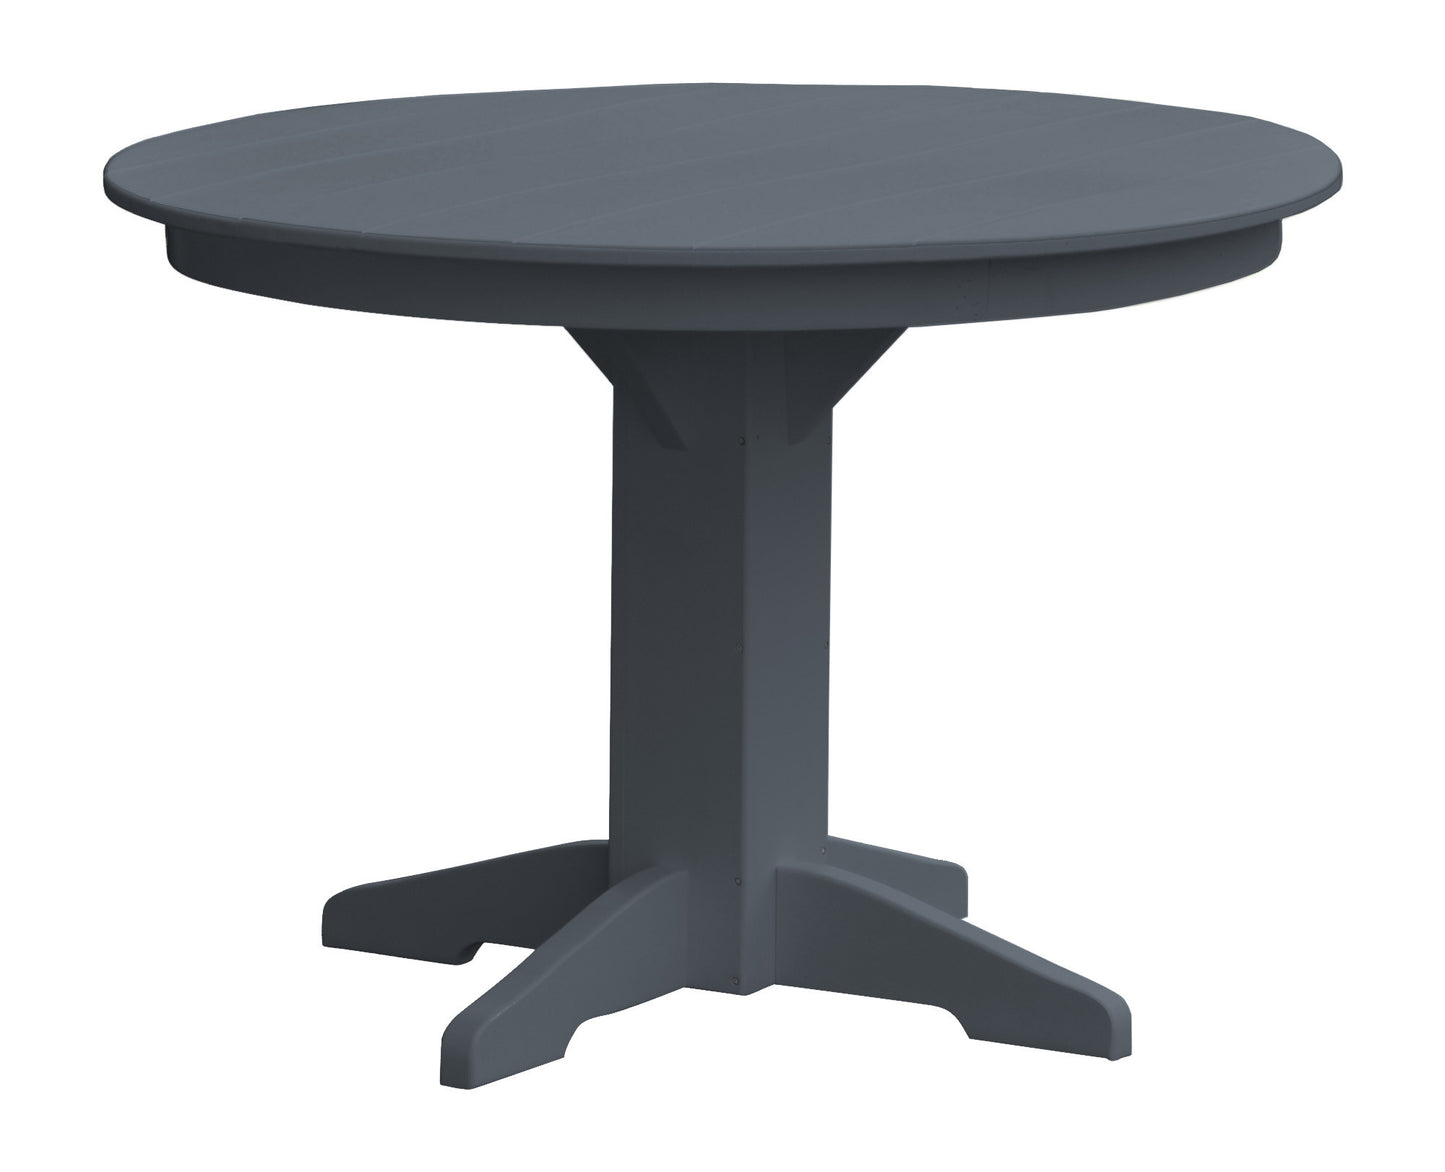 A&L Furniture Recycled Plastic 44" Round Dining Table - Dark Gray